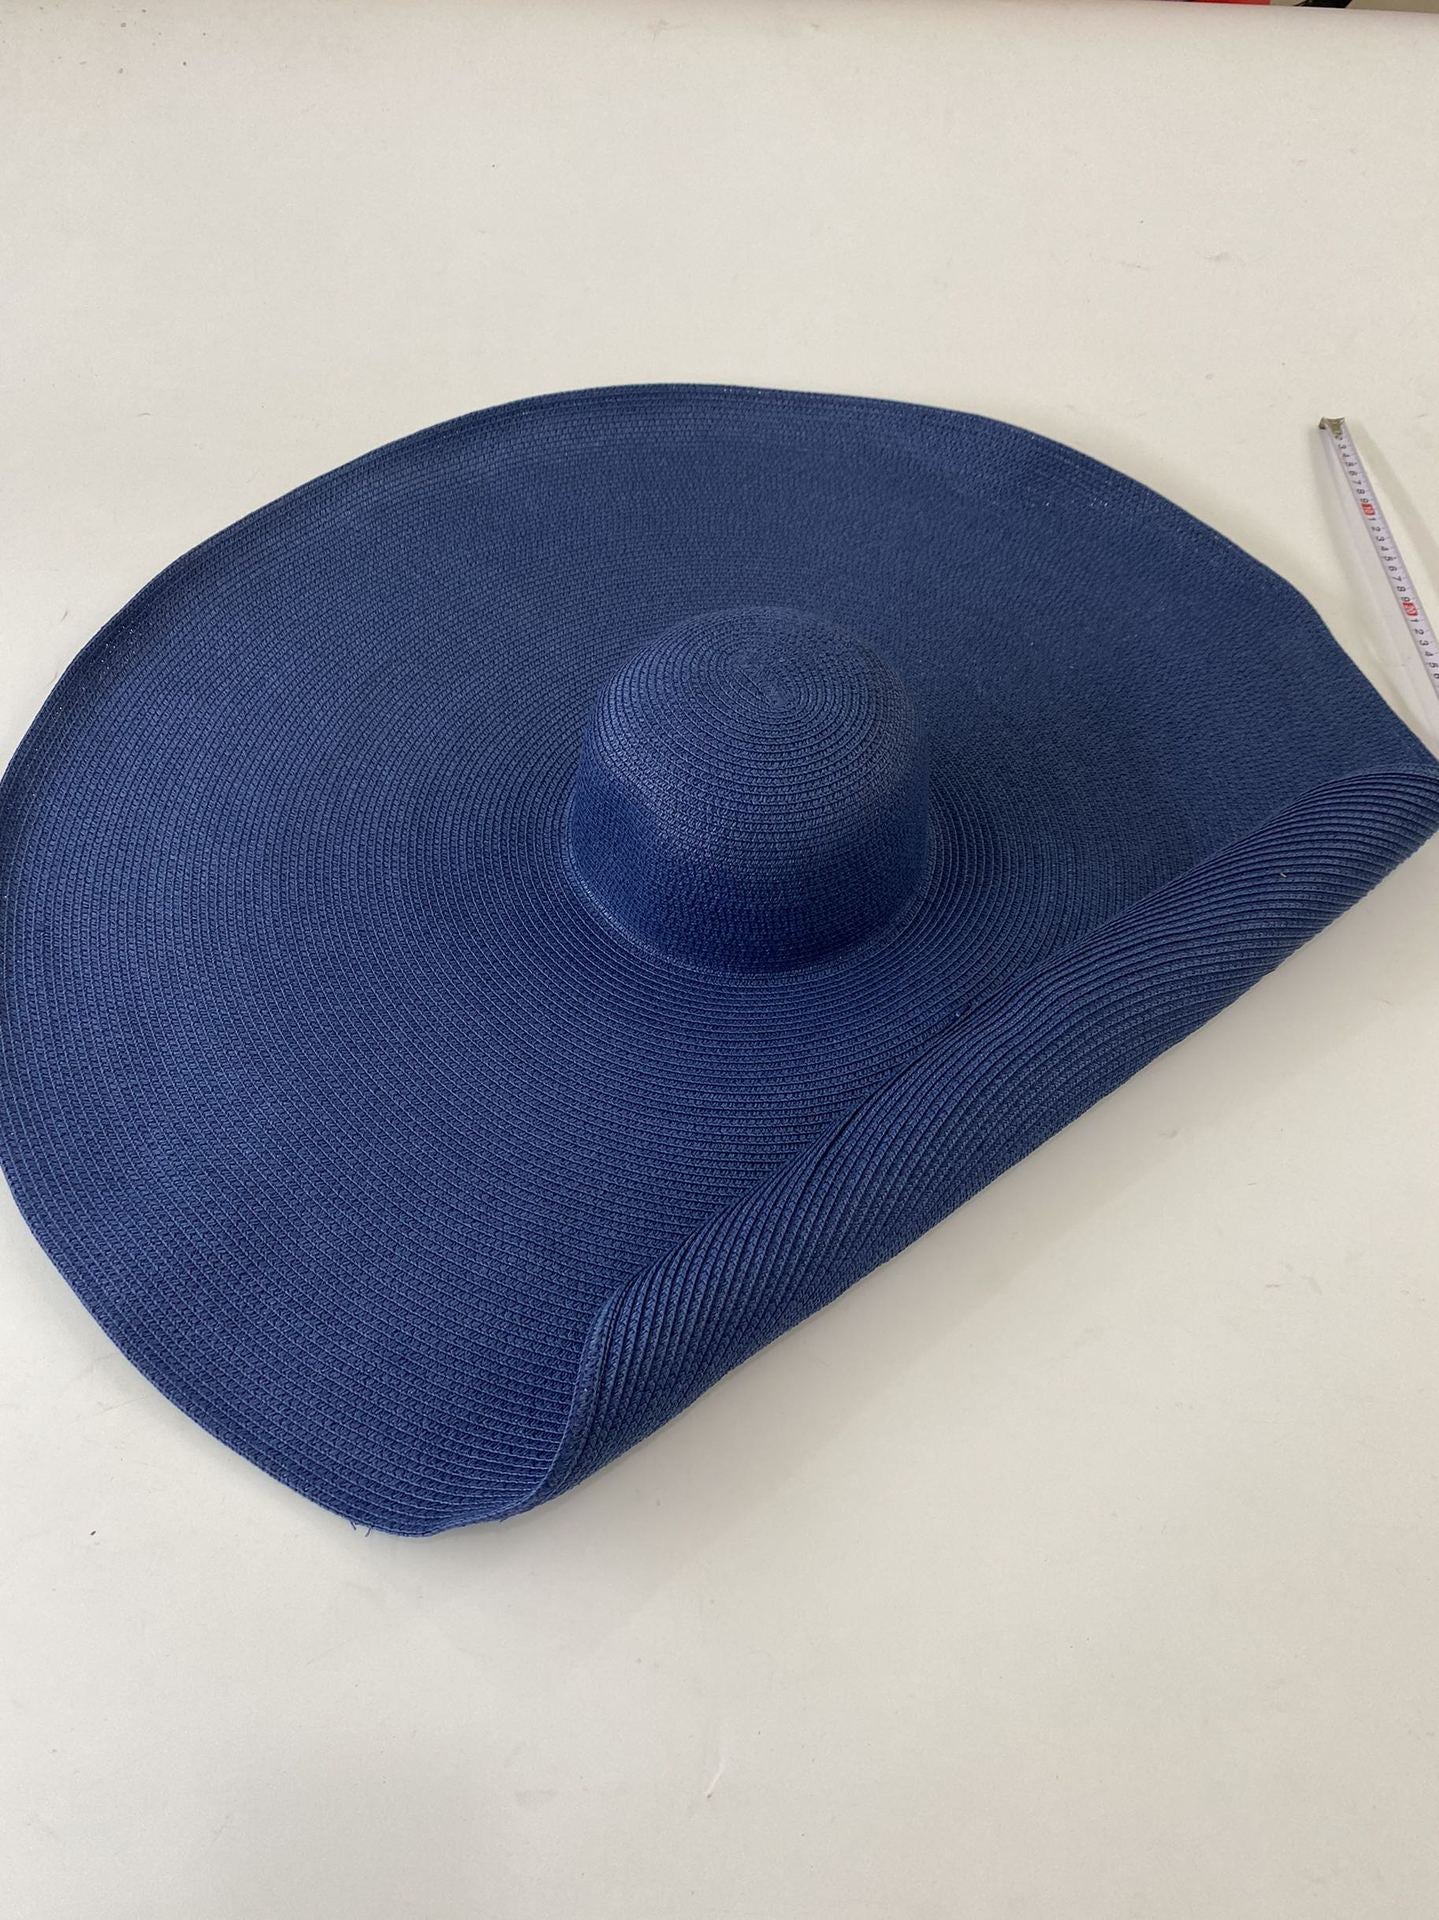 https://www.mydivinebeauty.biz/products/seaside-sun-hat-travel-and-vacation-straw-hat-straw-hat-paper-straw-hat